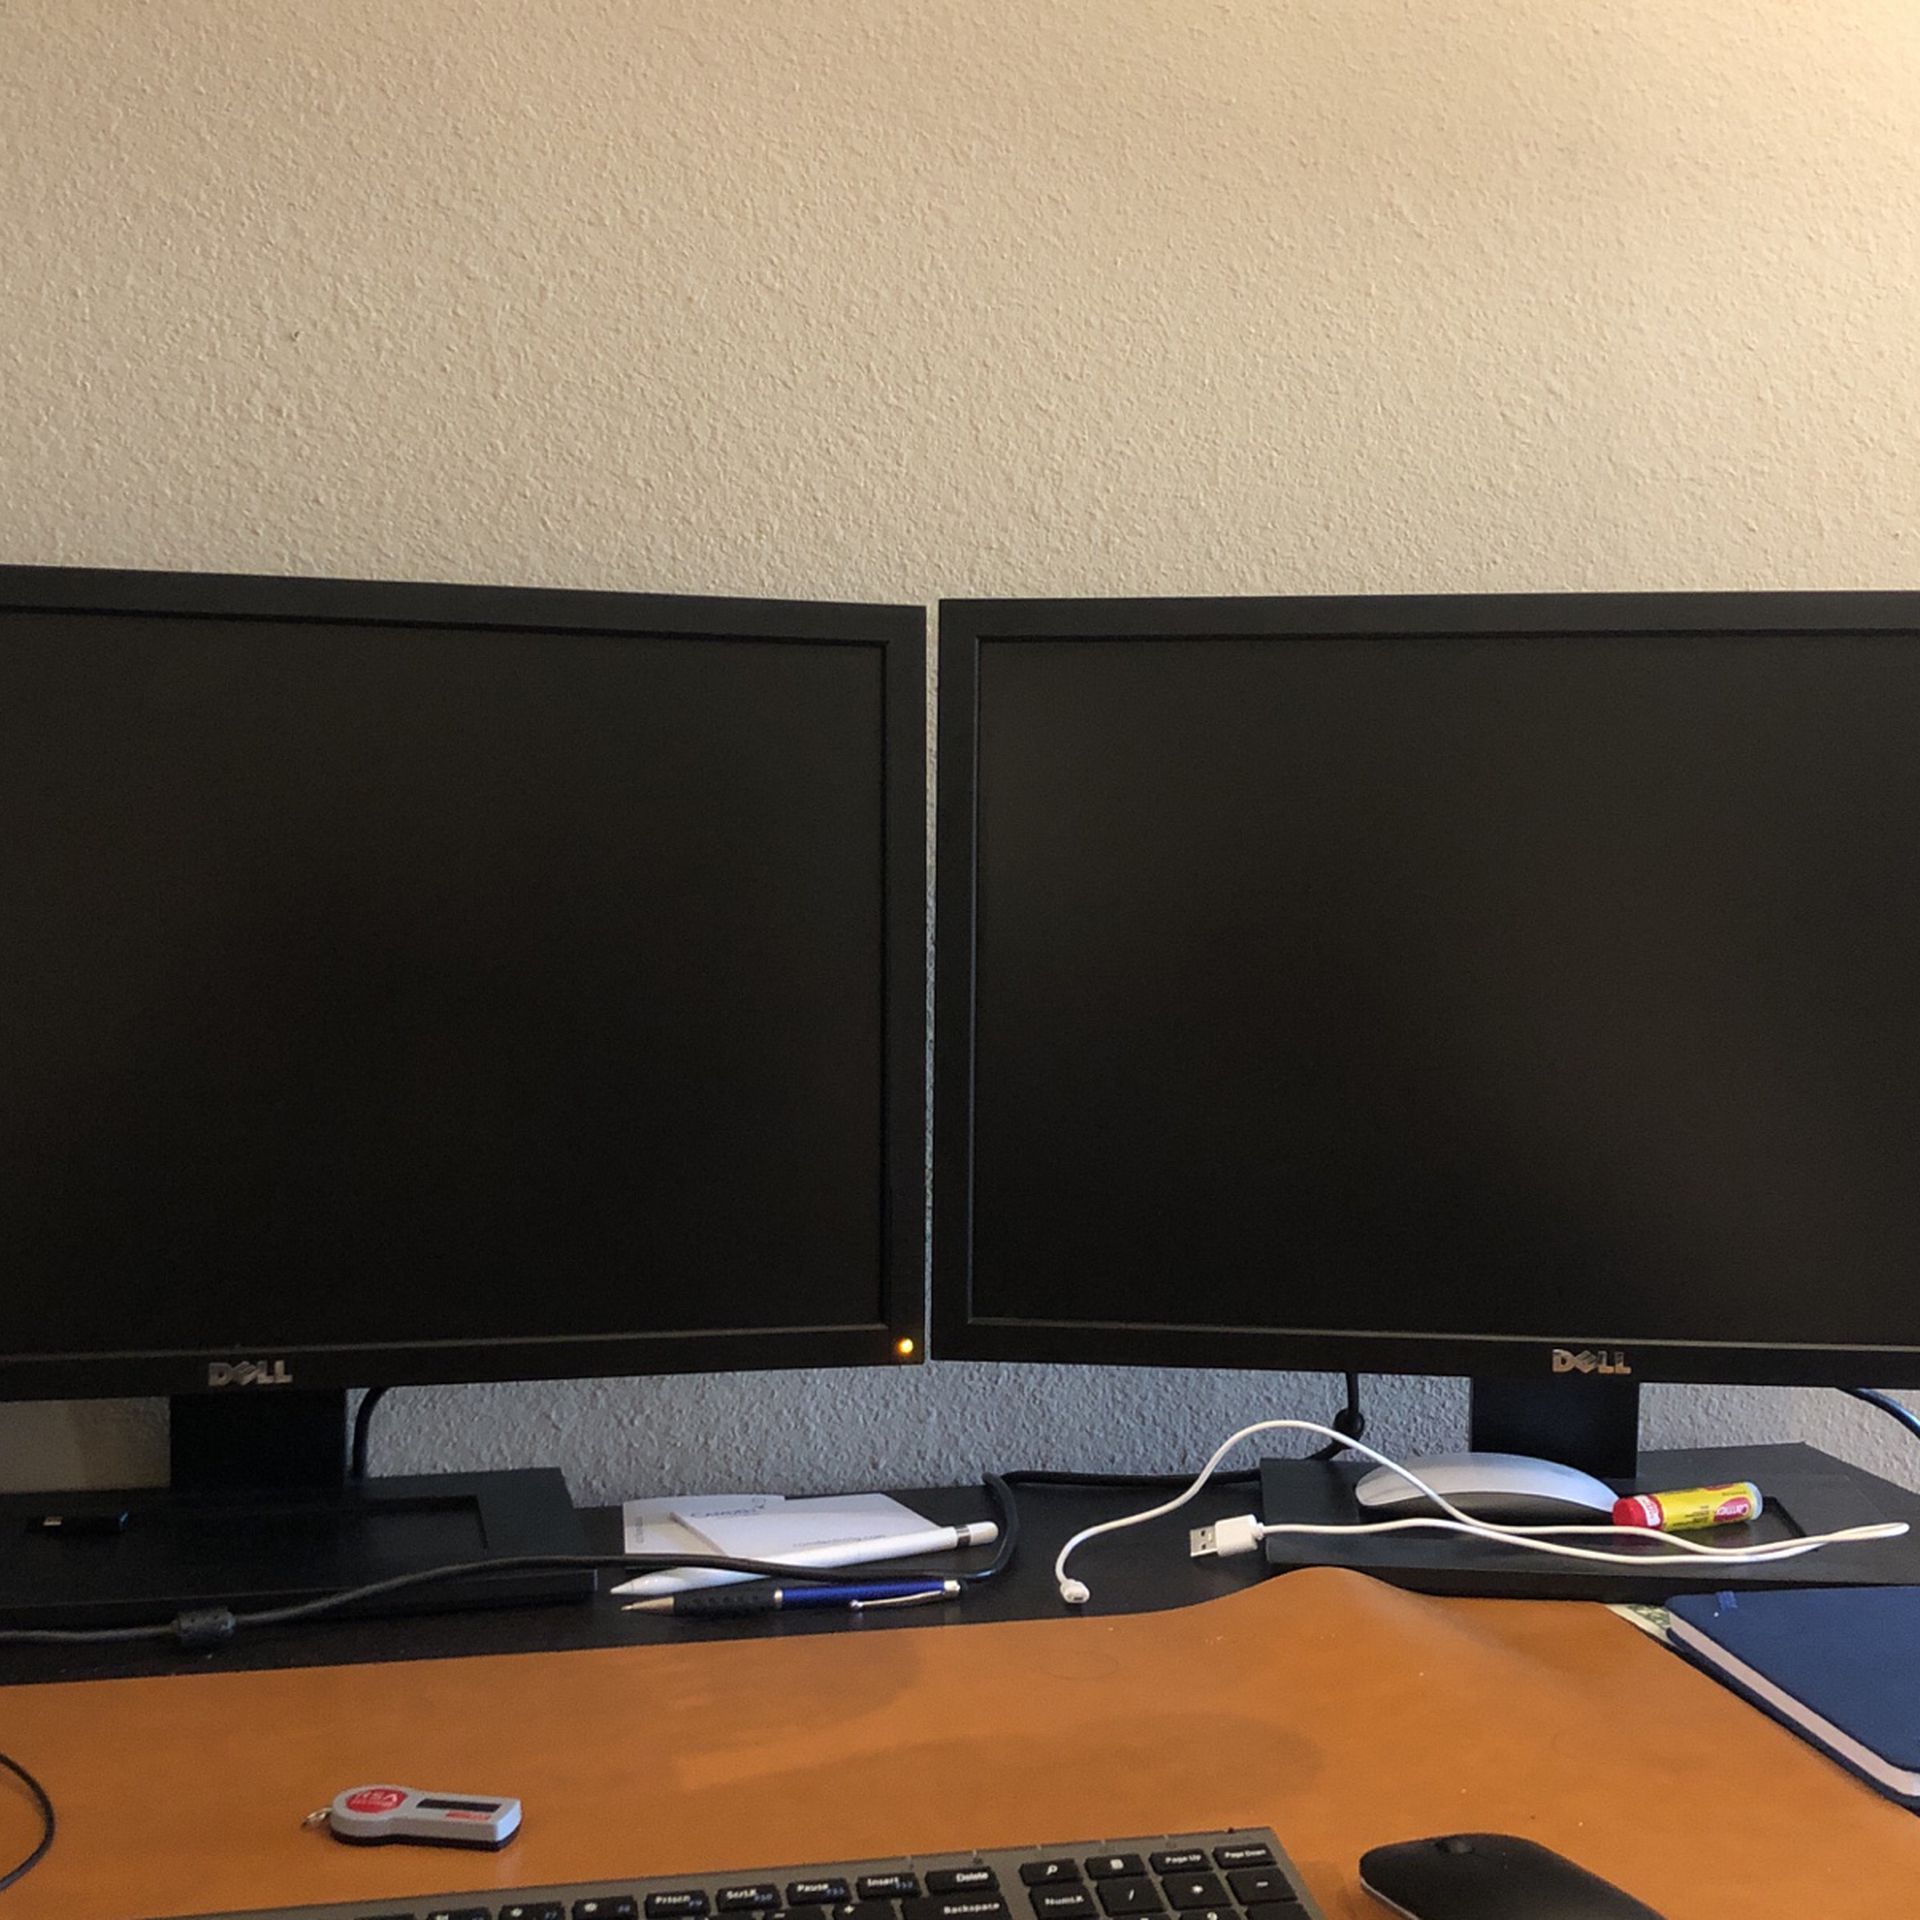 07/01/21 Updated: 2 X LCD Dell 27” Monitor Good Condition